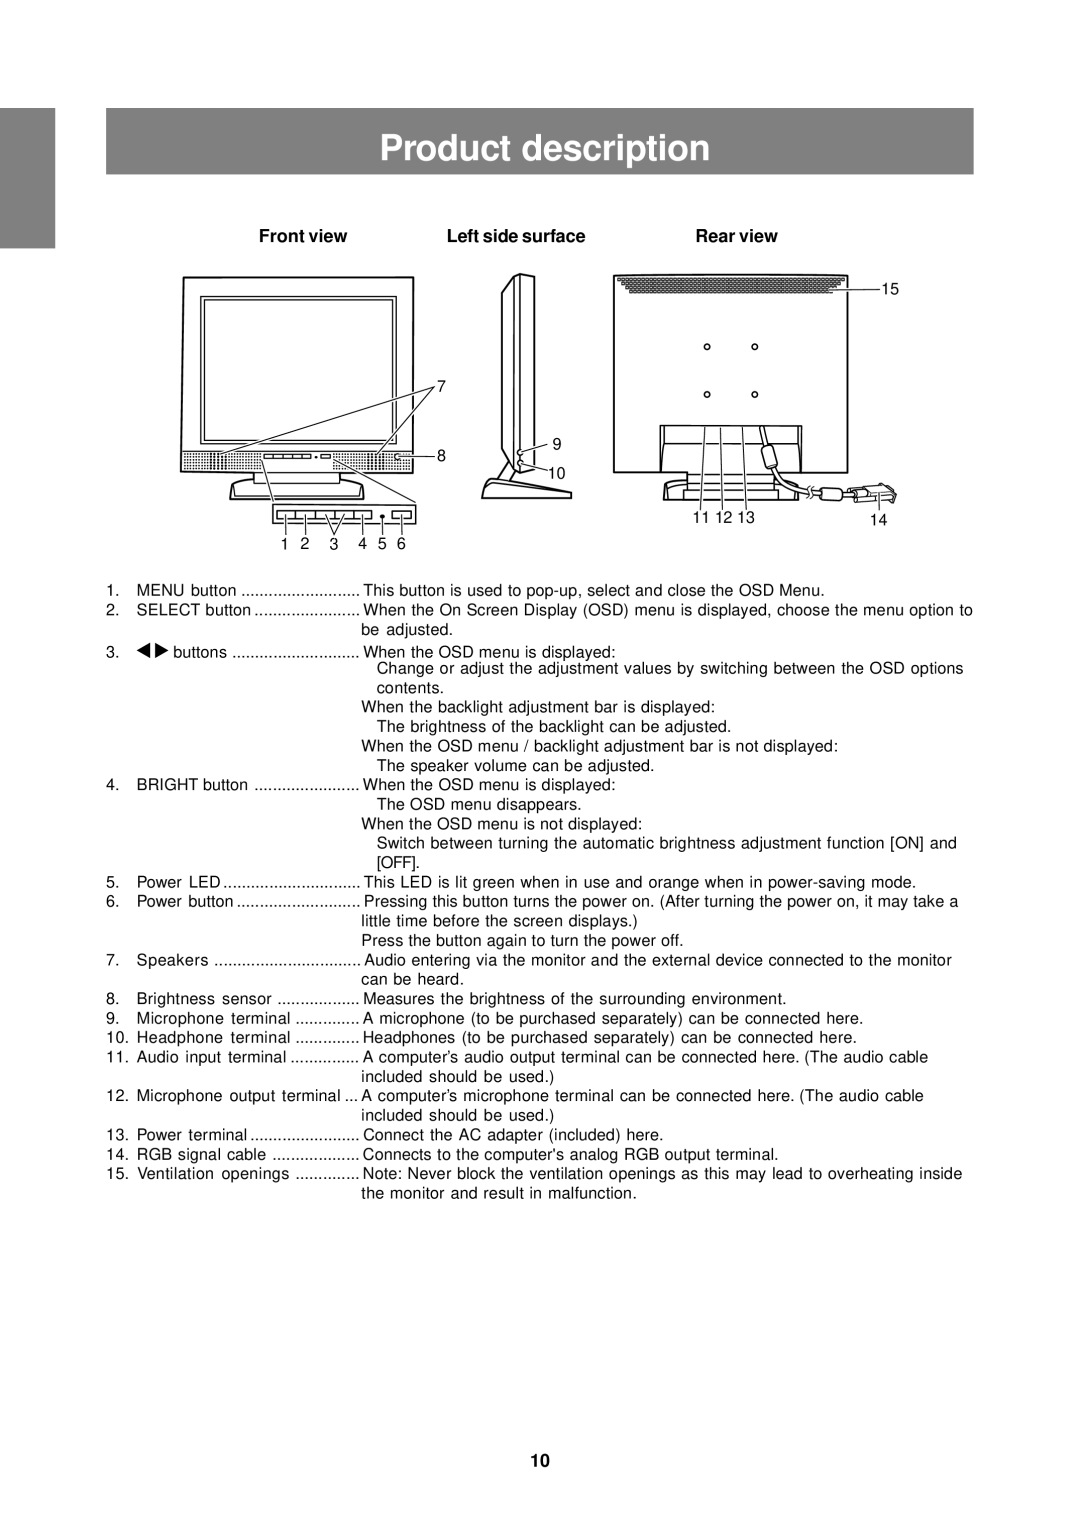 Sharp LL-T15S1 operation manual Product description, Front view Left side surface, Rear view 